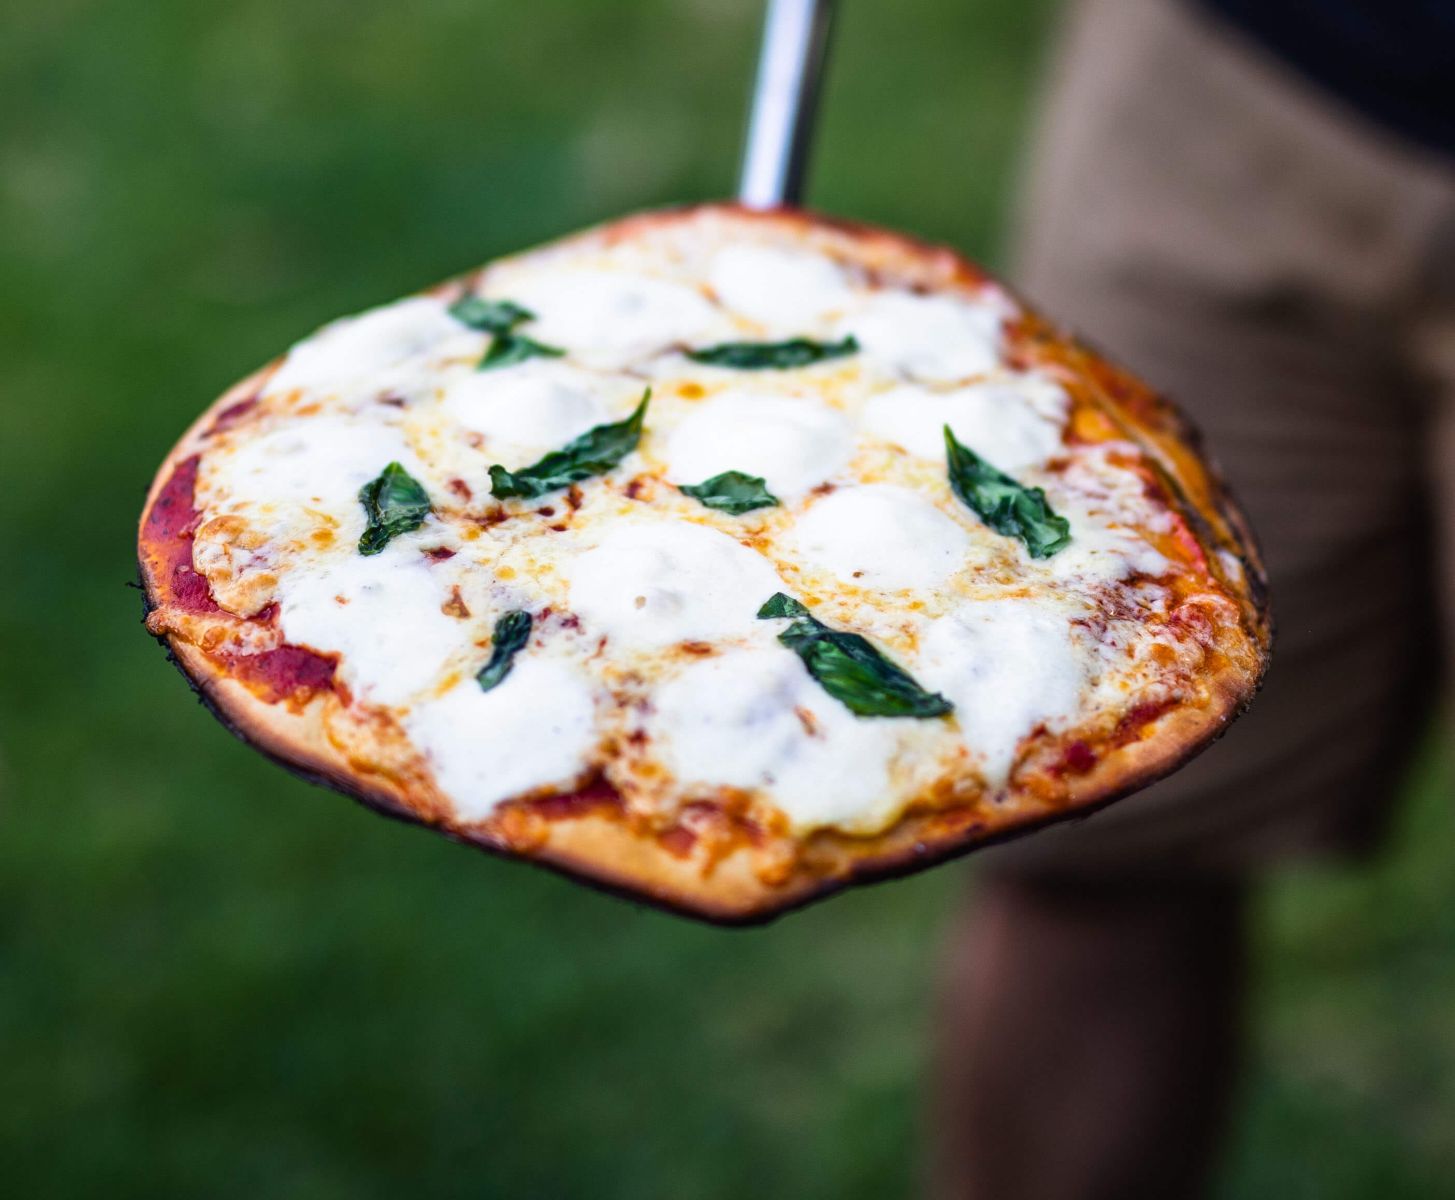 This image shows delicious pizza cooked in the pizza oven